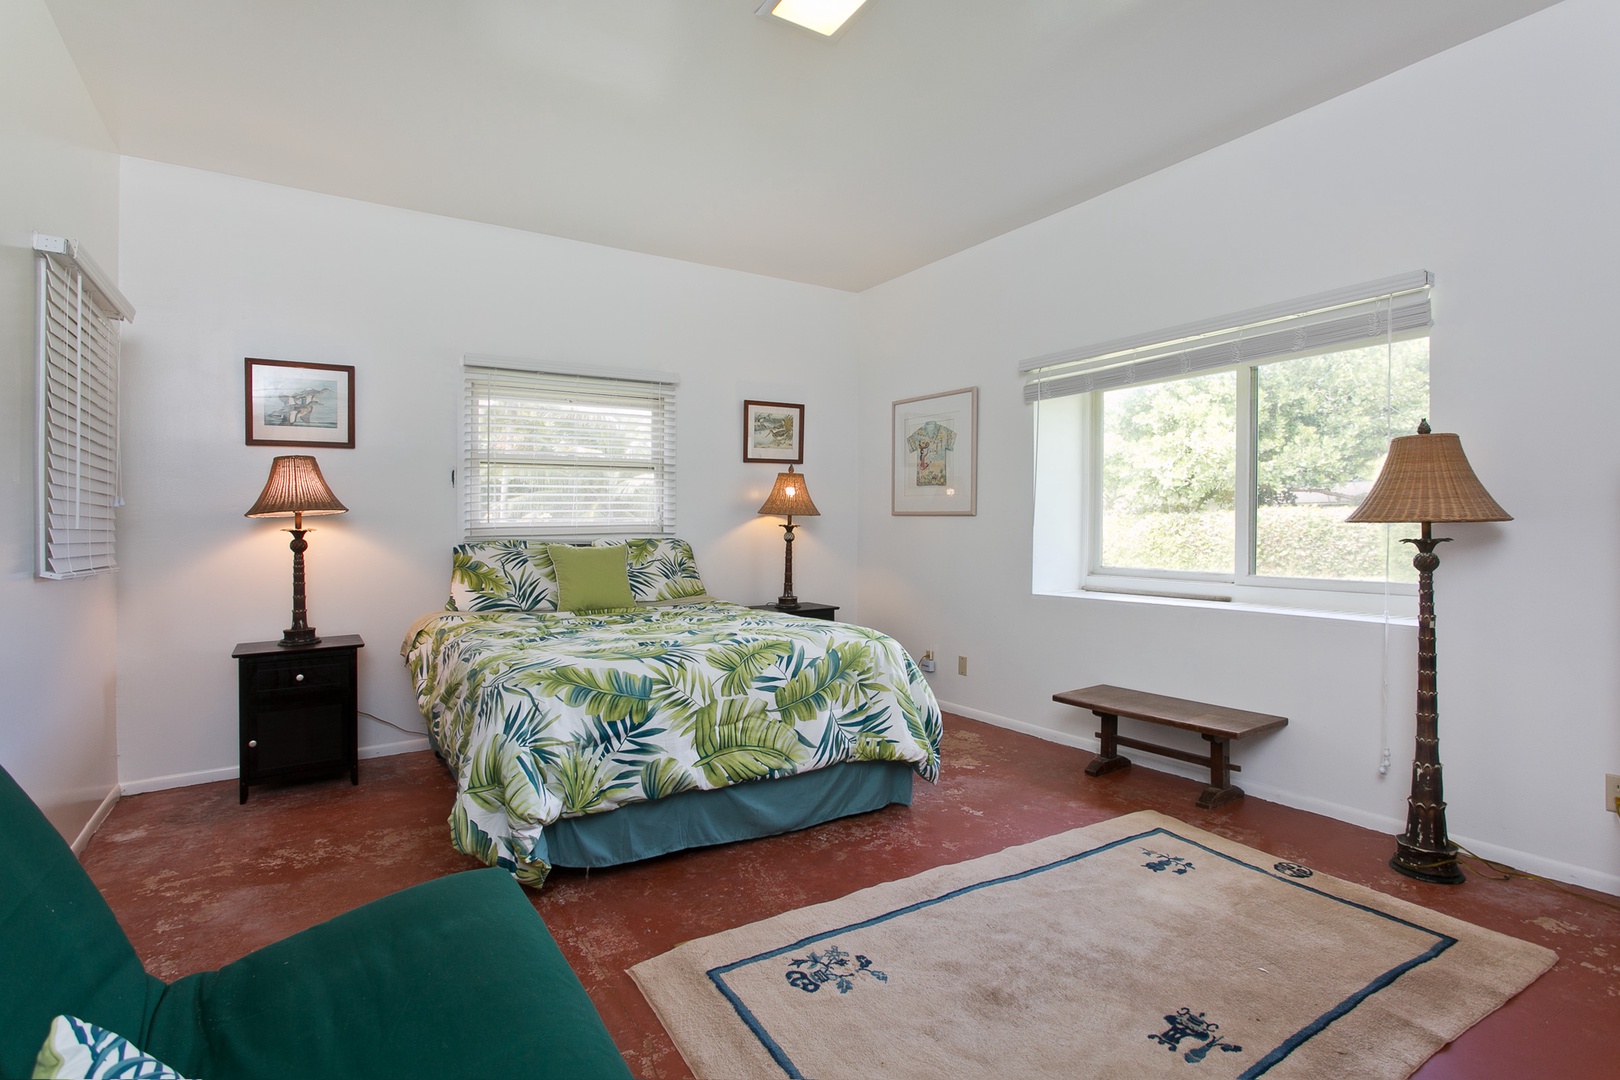 Laie Vacation Rentals, Waipuna Hale - Primary suite with pull-out futon.